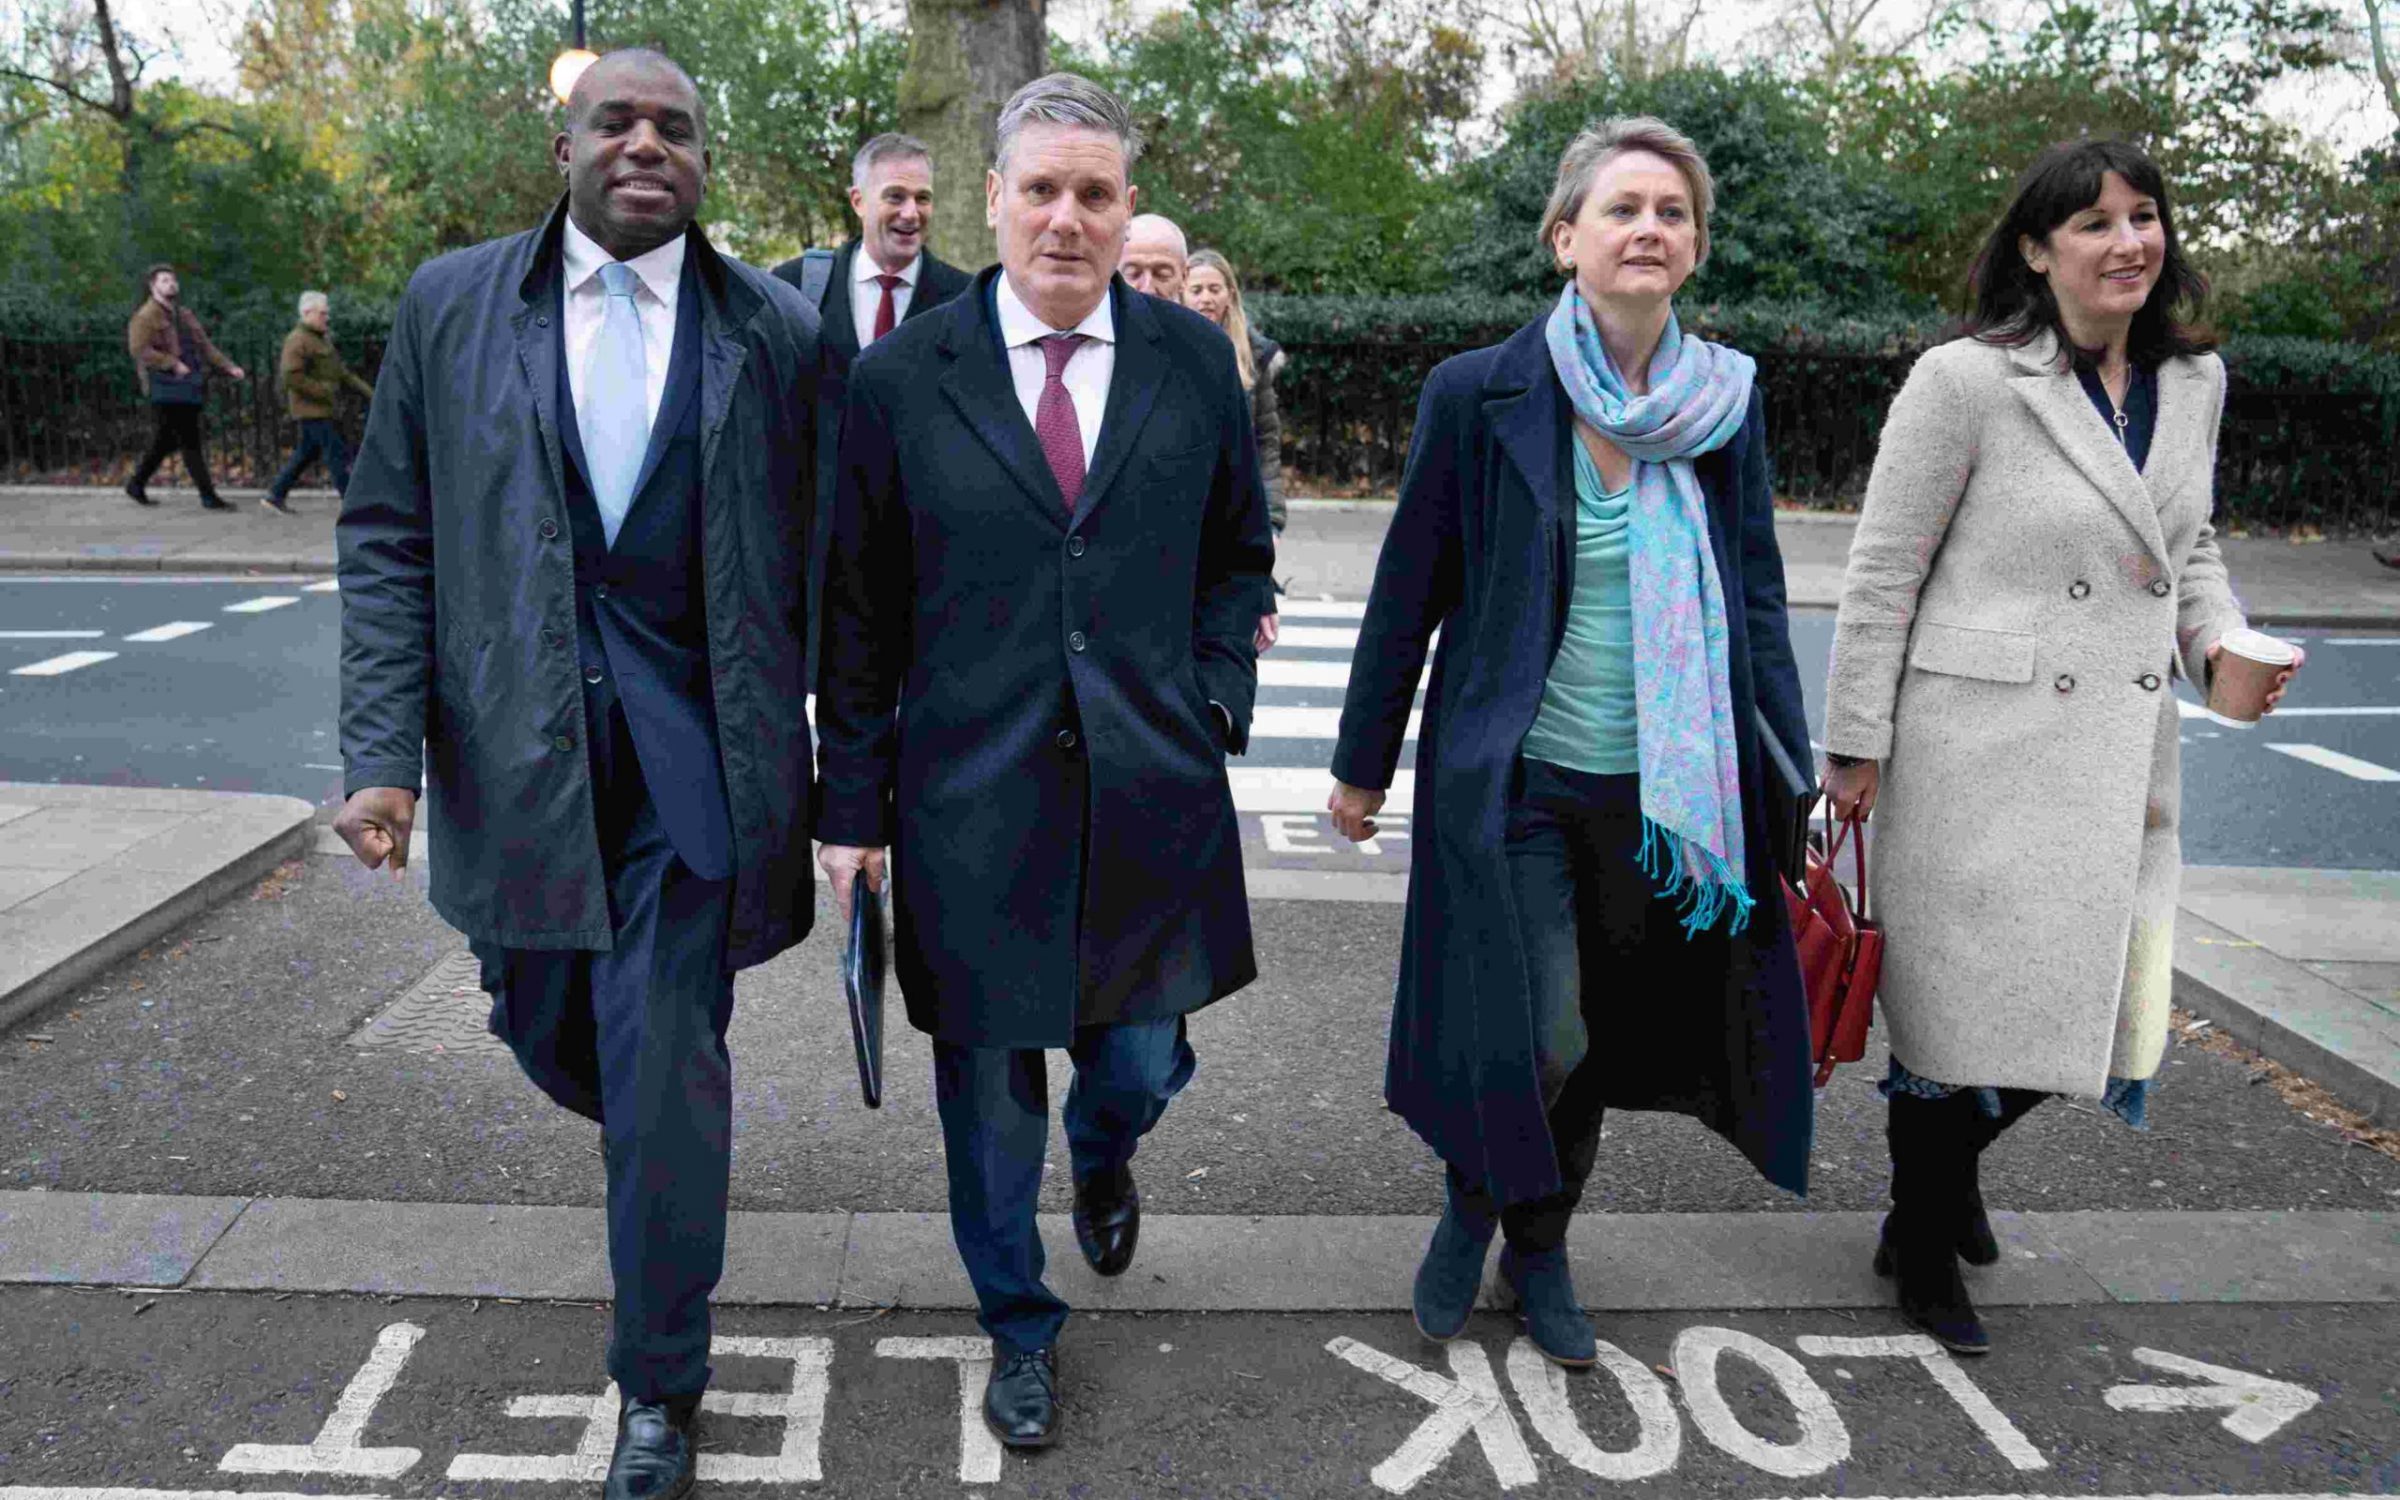 Labour leader, Keir Starmer (2nd from left) walks to shadow cabinet meeting with some of his new appointees including David Lammy (far left) Shadow Foreign secretary, Yvette Cooper (3rd from left) shadow Home Secretary and Rachel Reeves (far right) shadow Chancellor of the Exchequer after reshuffle.